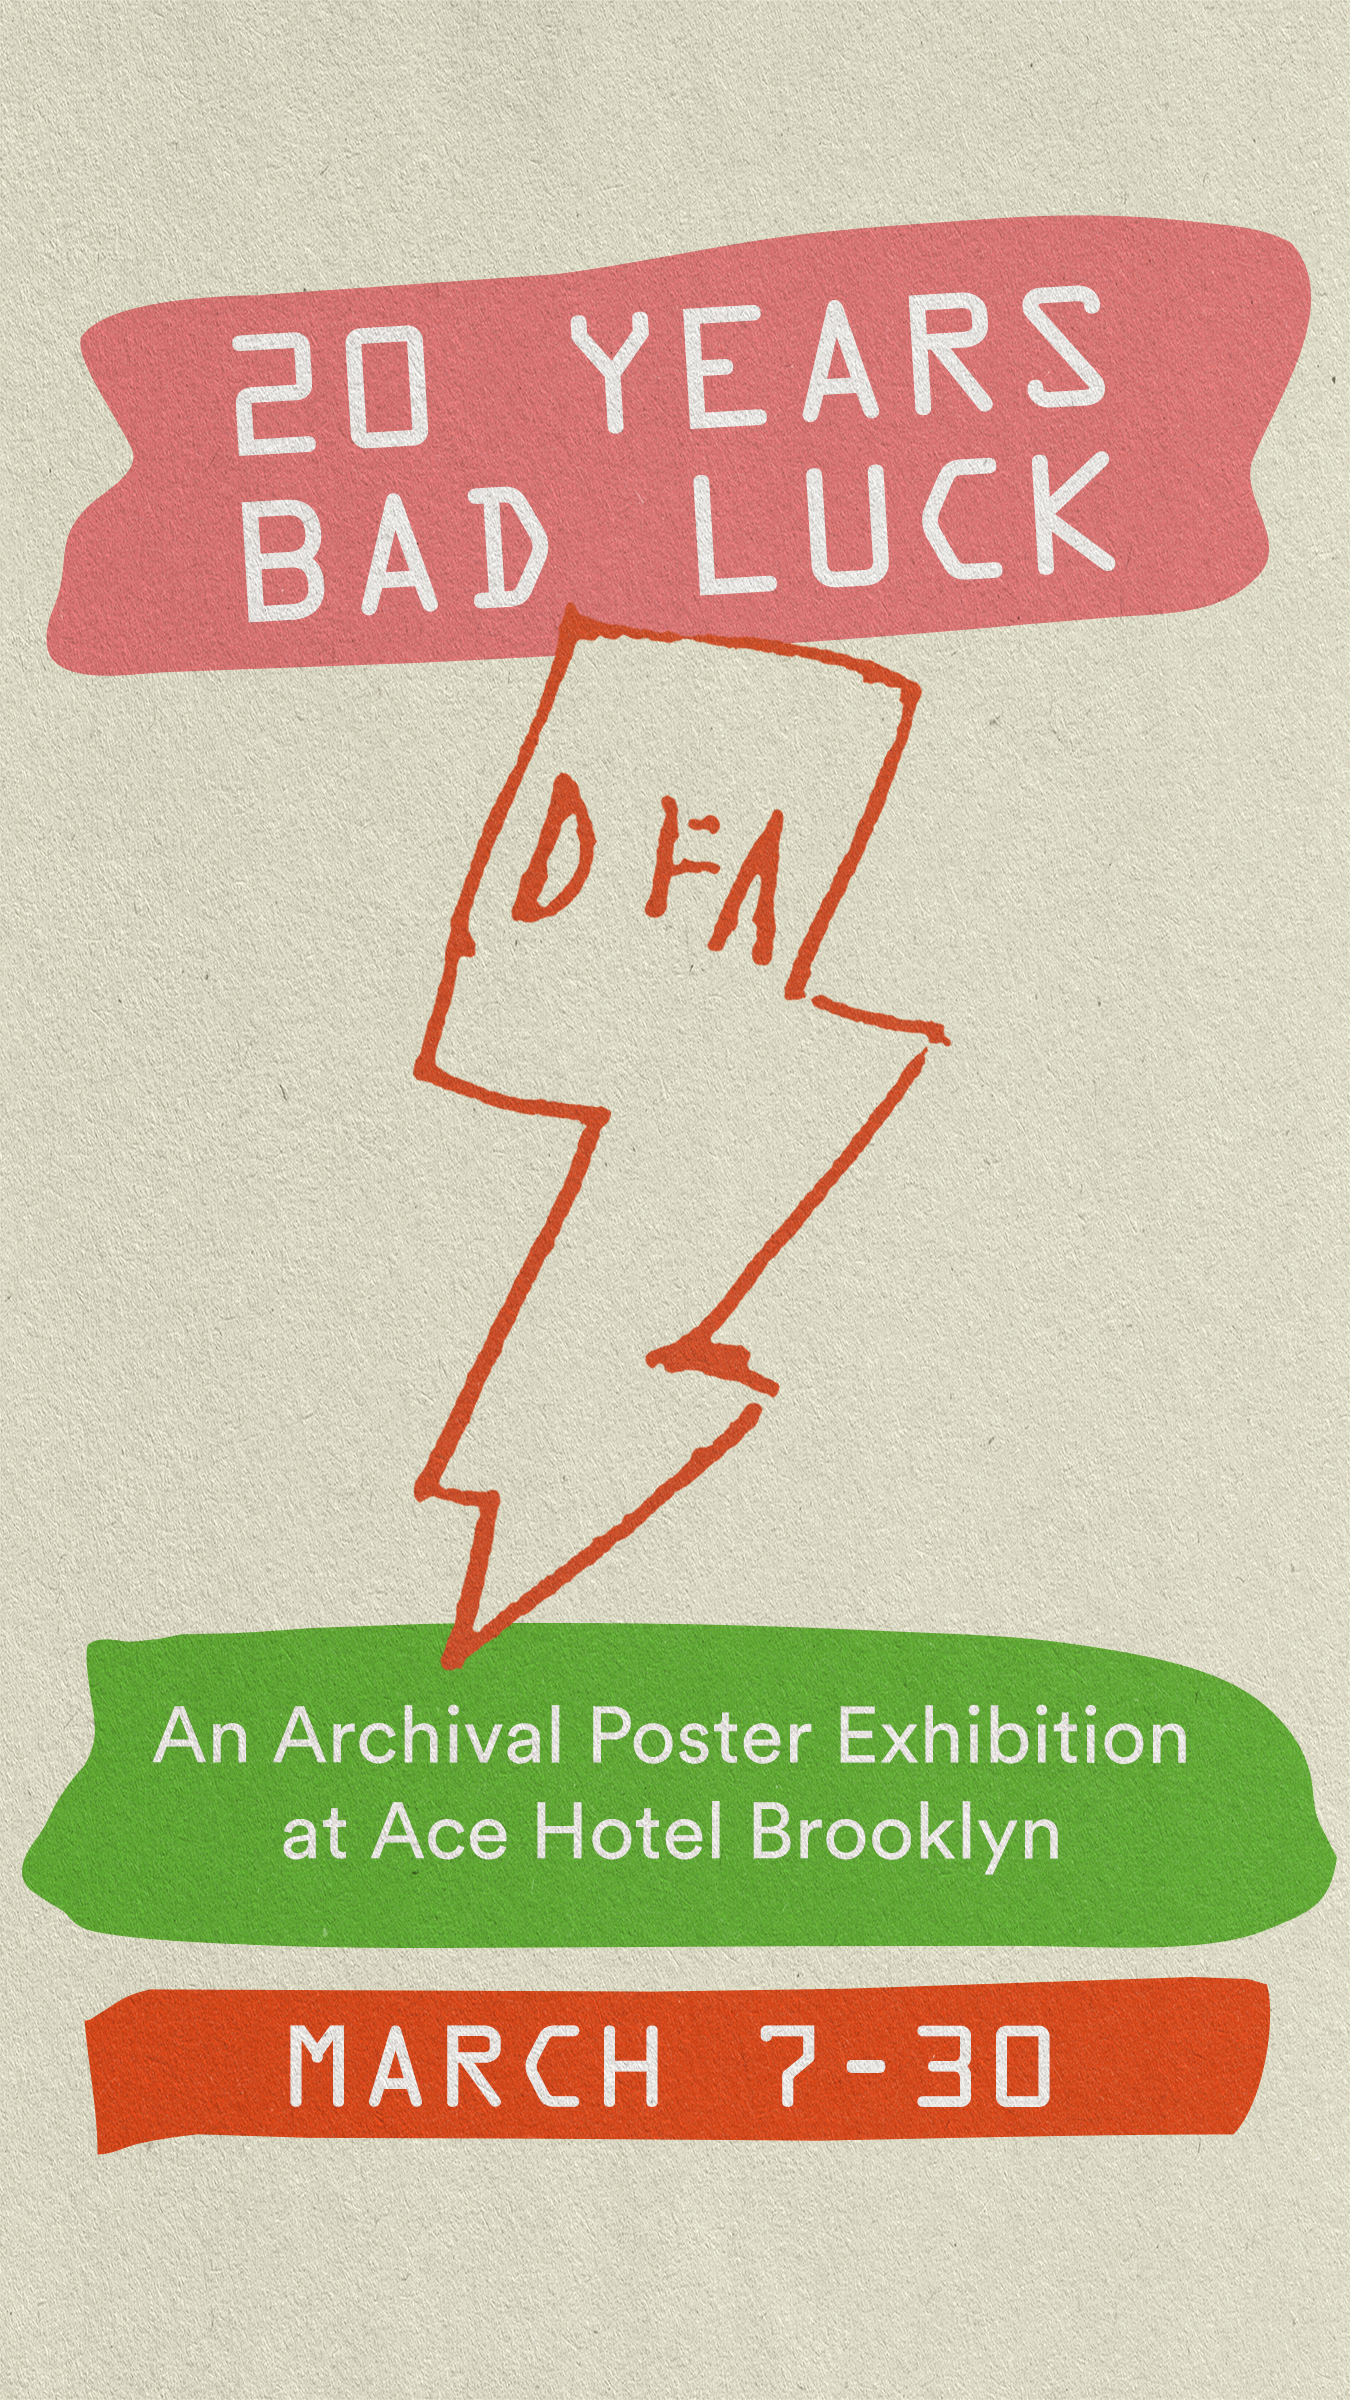 20 Years Bad Luck event flyer